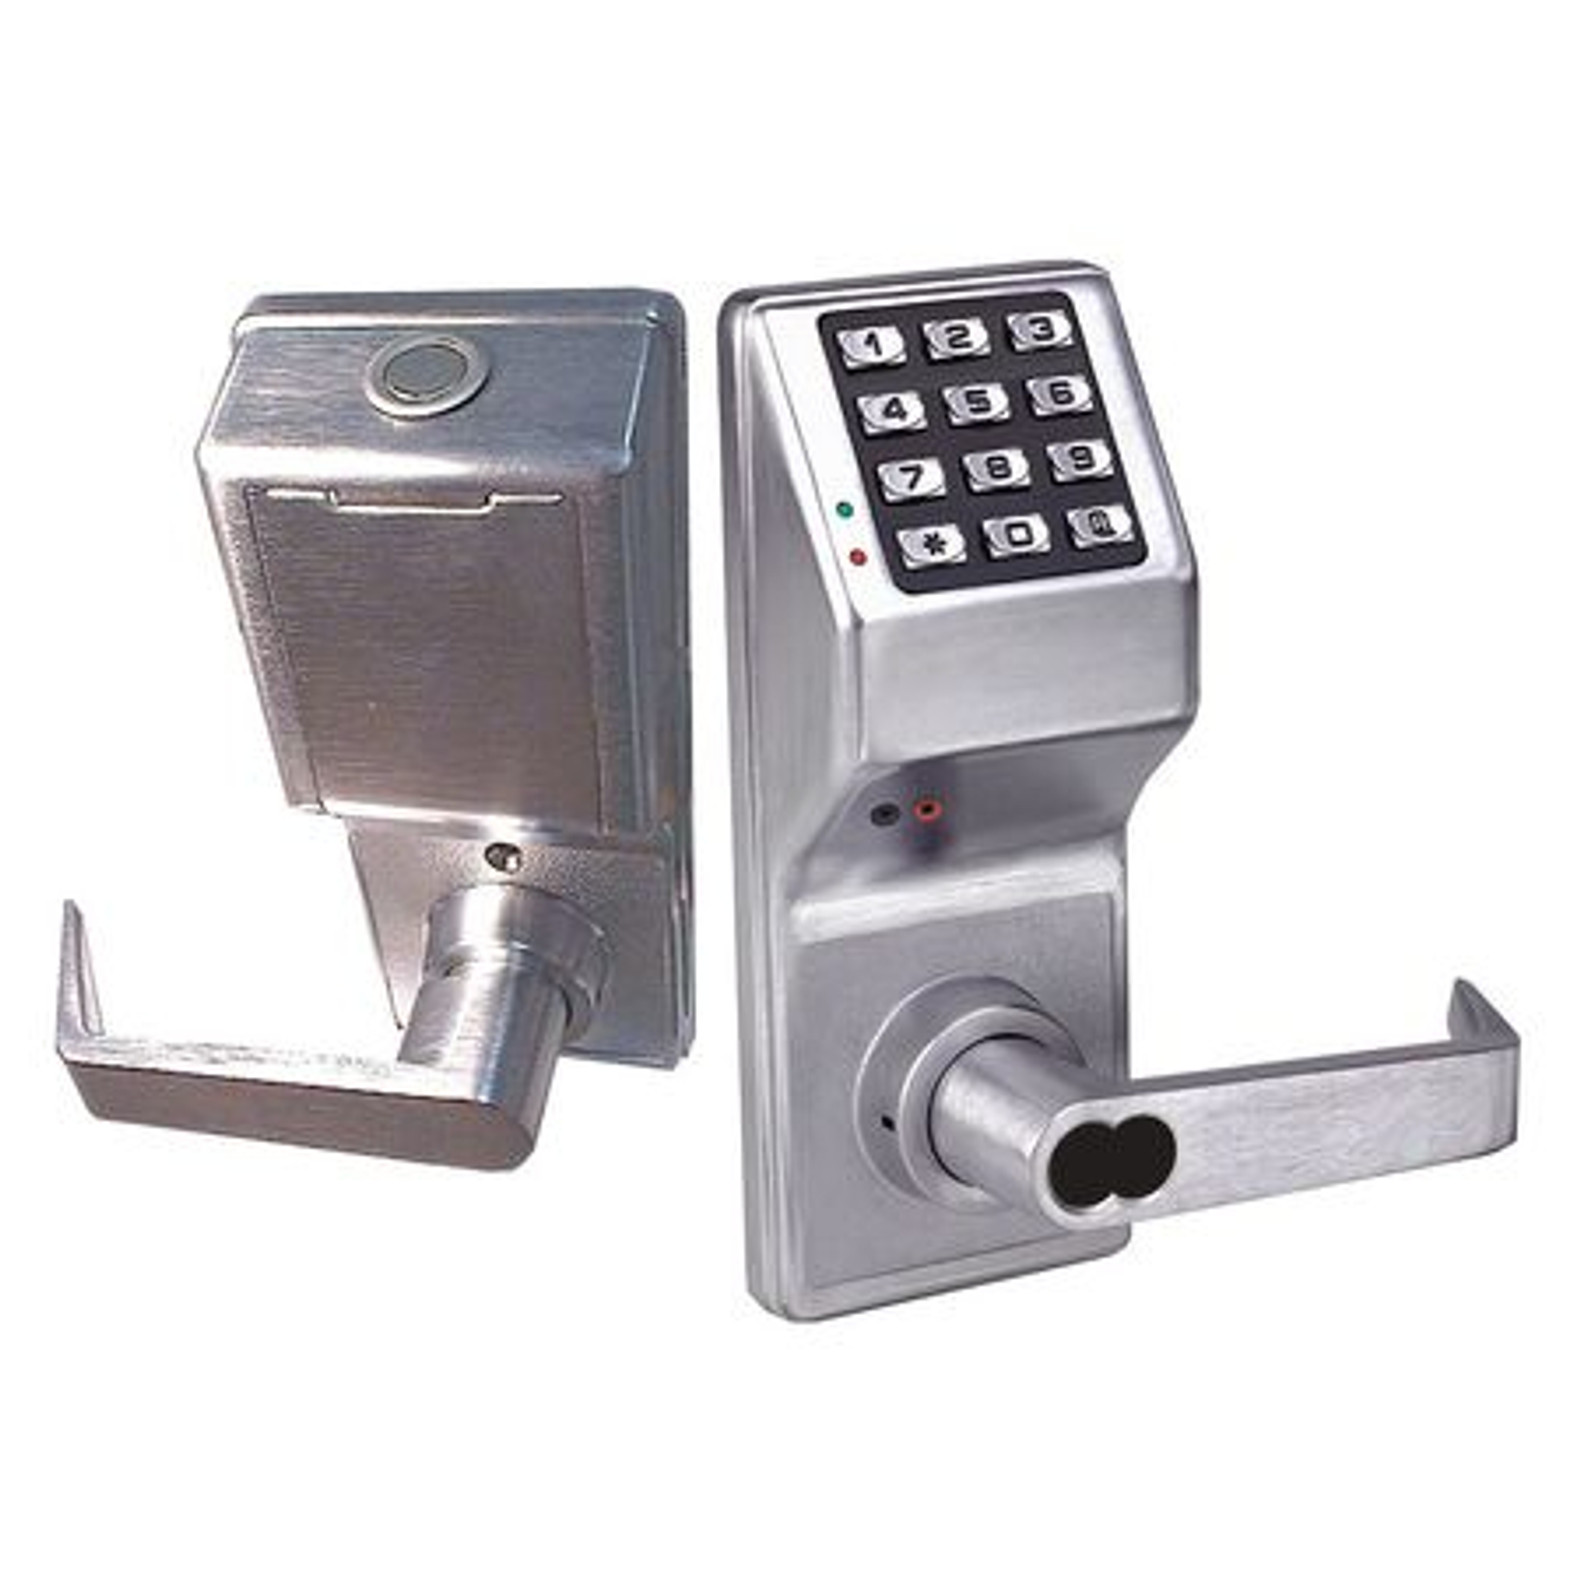 Alarm Lock Trilogy cylindrical w/privacy DL4100IC Interchangeable core  (less core) pin only KAL DOOR HARDWARE